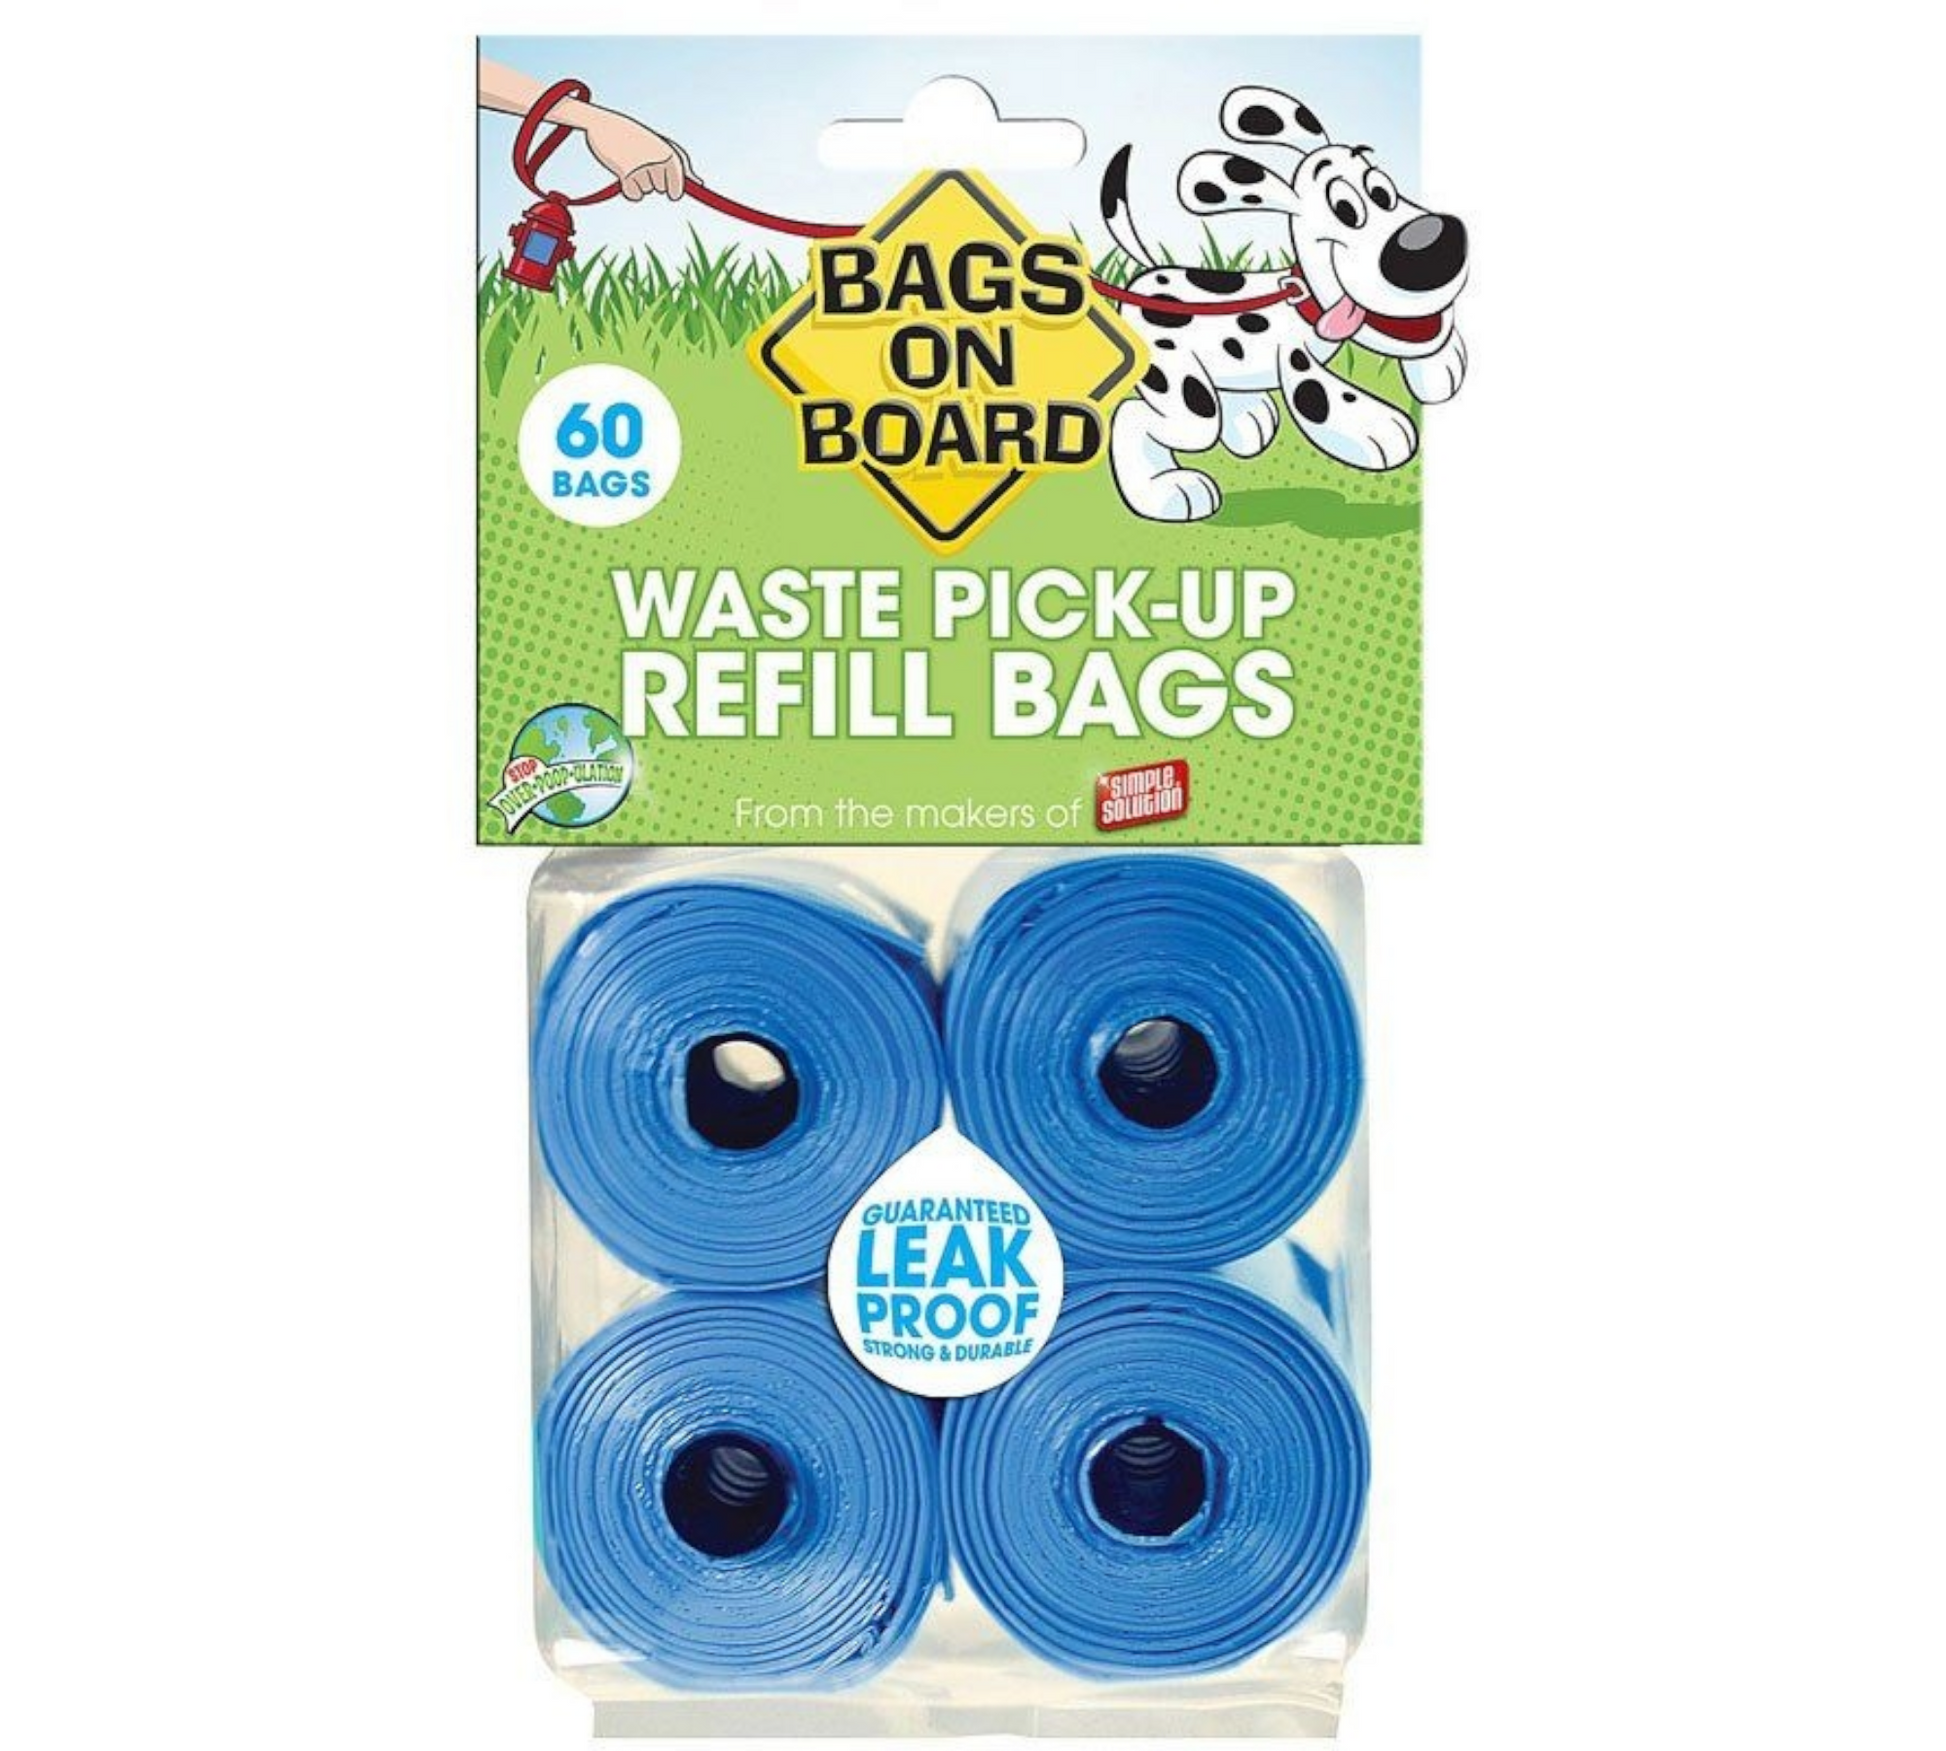 Canine's World Poop Bags Bags on Board Bag Refill Pack Bags On Board